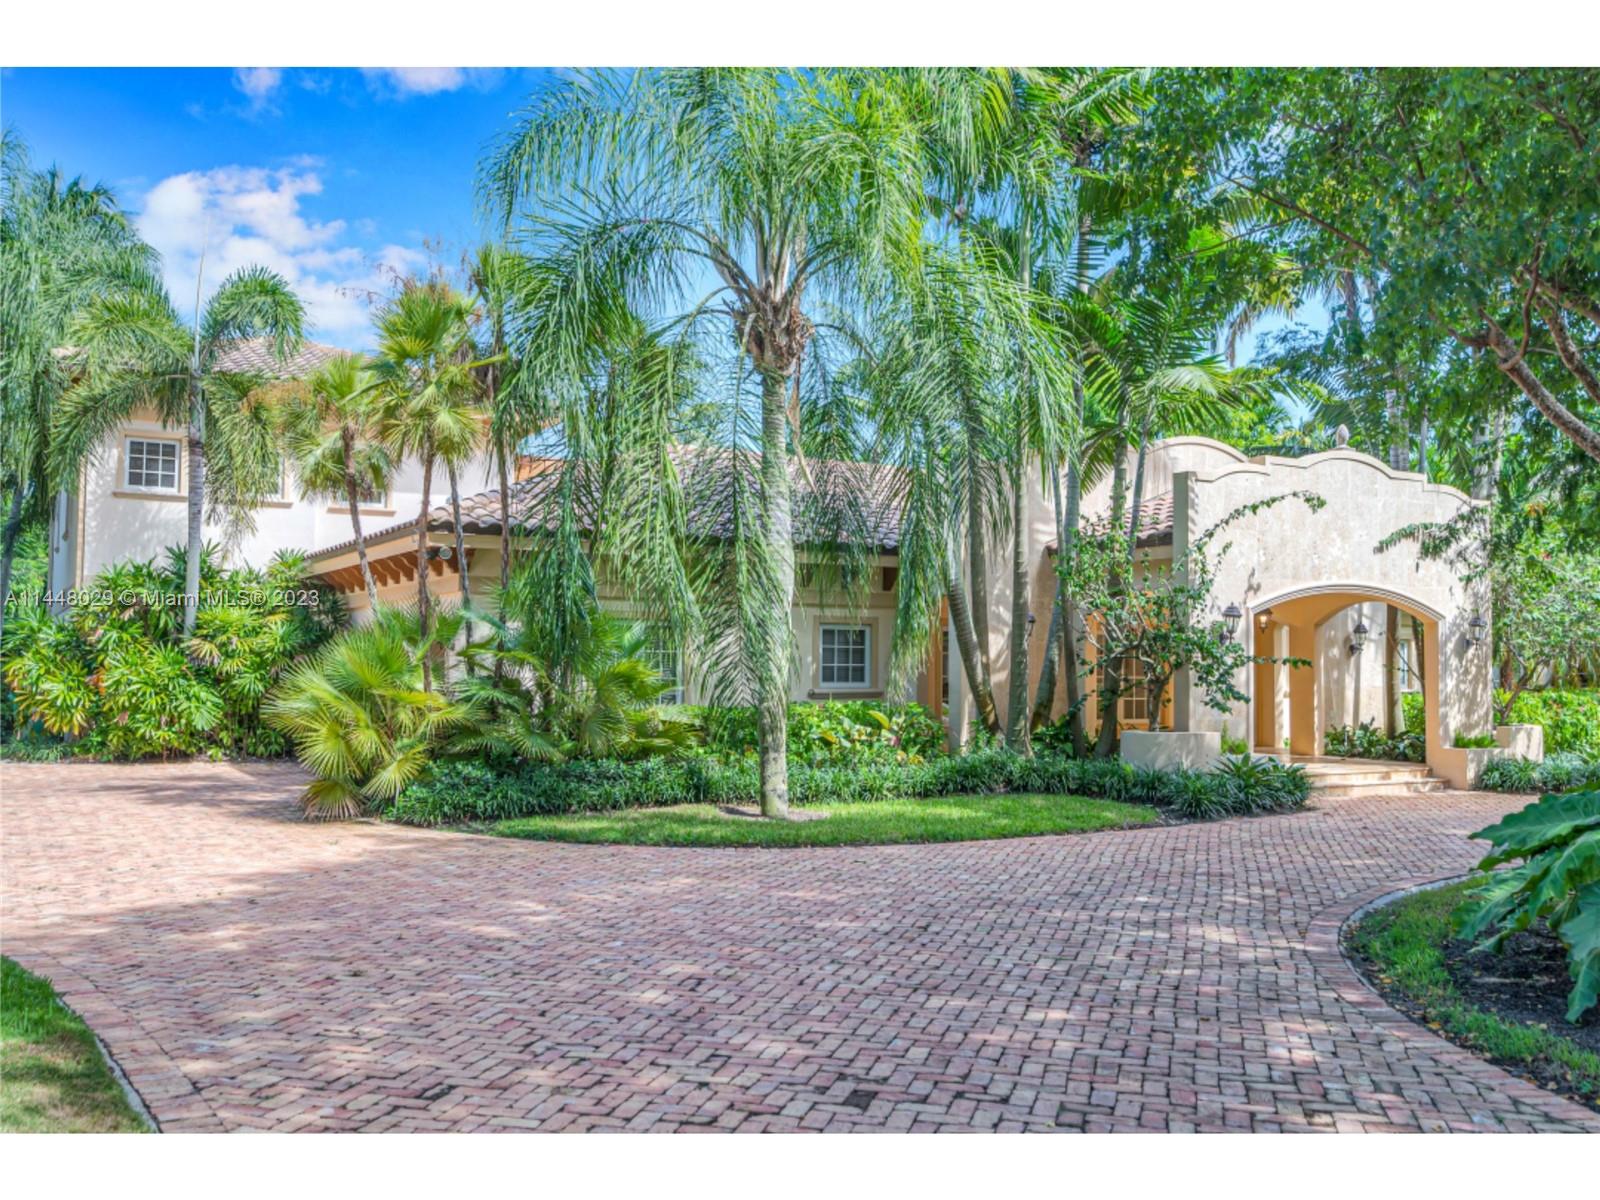 PRIVACY-LUXURY-SECURITY Escape to your Lushly Landscaped 2-Story Resort Villa, in Prime North Pinecrest. This split plan (2-3) 5BR - 5BA, fully gated, corner lot home, is close to all the great schools, shopping & the highway. Thoroughly Remodeled 2020, & Built in 2011 W upgrades to the highest standards for hurricane protection, privacy, luxury and security. Enjoy the view from social areas and kitchen to action on professional N-S lighted tennis court & sparkling blue salt system pool. Your clean turn-key home of 4494 ASF offers a huge open floor plan living room/dining room, amazing white quartz gourmet kitchen W-New Viking appliances, High Ceilings, Onyx/Granite BA, Built-in-Closets, Amazing Laundry Room, State-of-the-Art Security System.